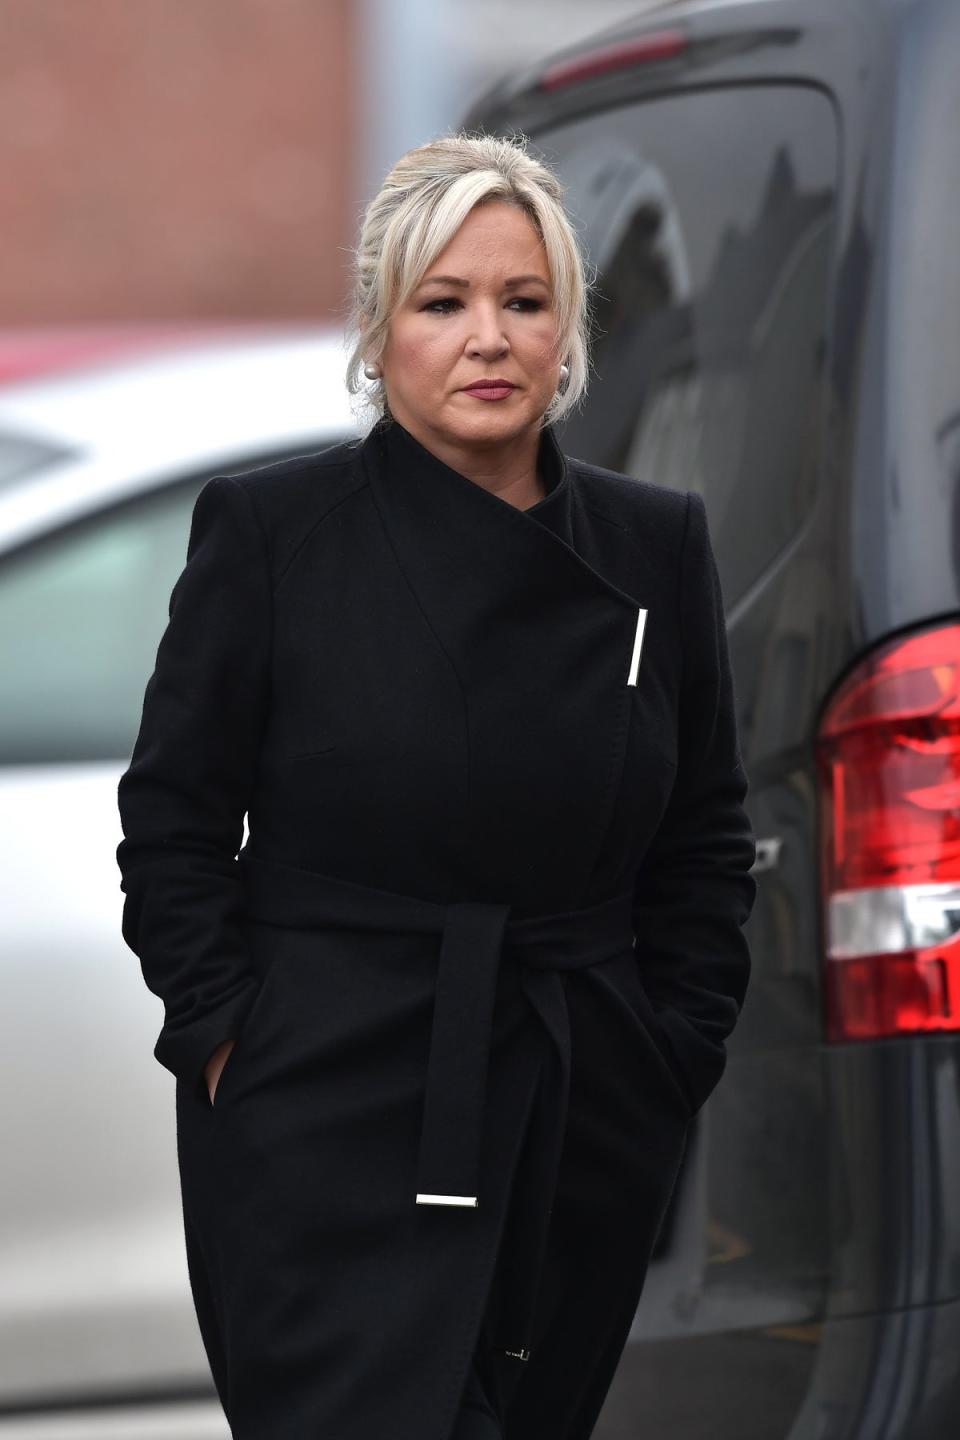 Northern Ireland first minister Michelle O’Neill urged a “thought-out” and “considered” response from both the British and Irish governments (Getty Images)